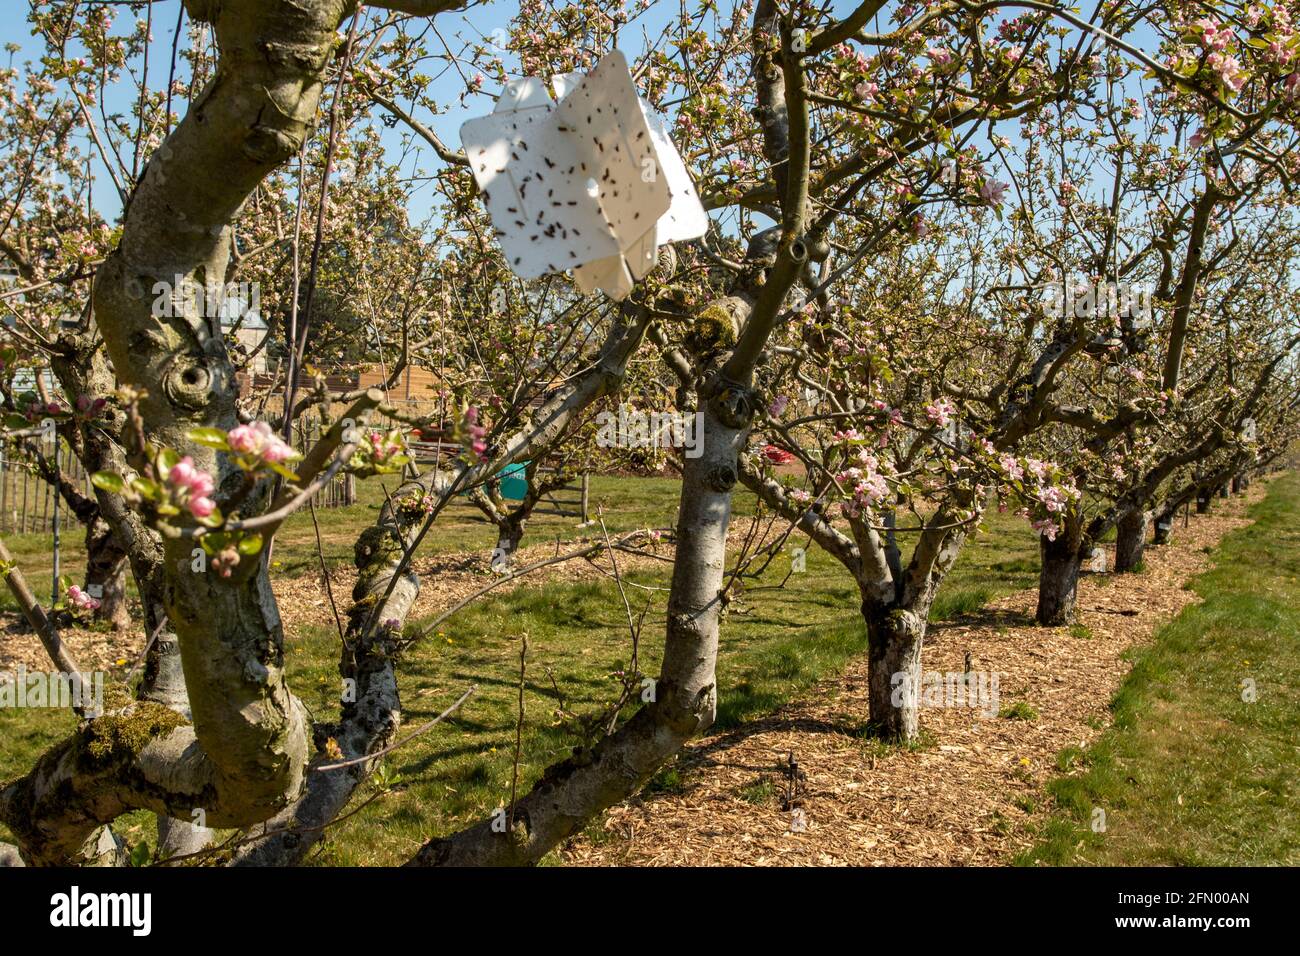 Sticky pest trap in apple tree late May, sun shining and deep blue sky Stock Photo